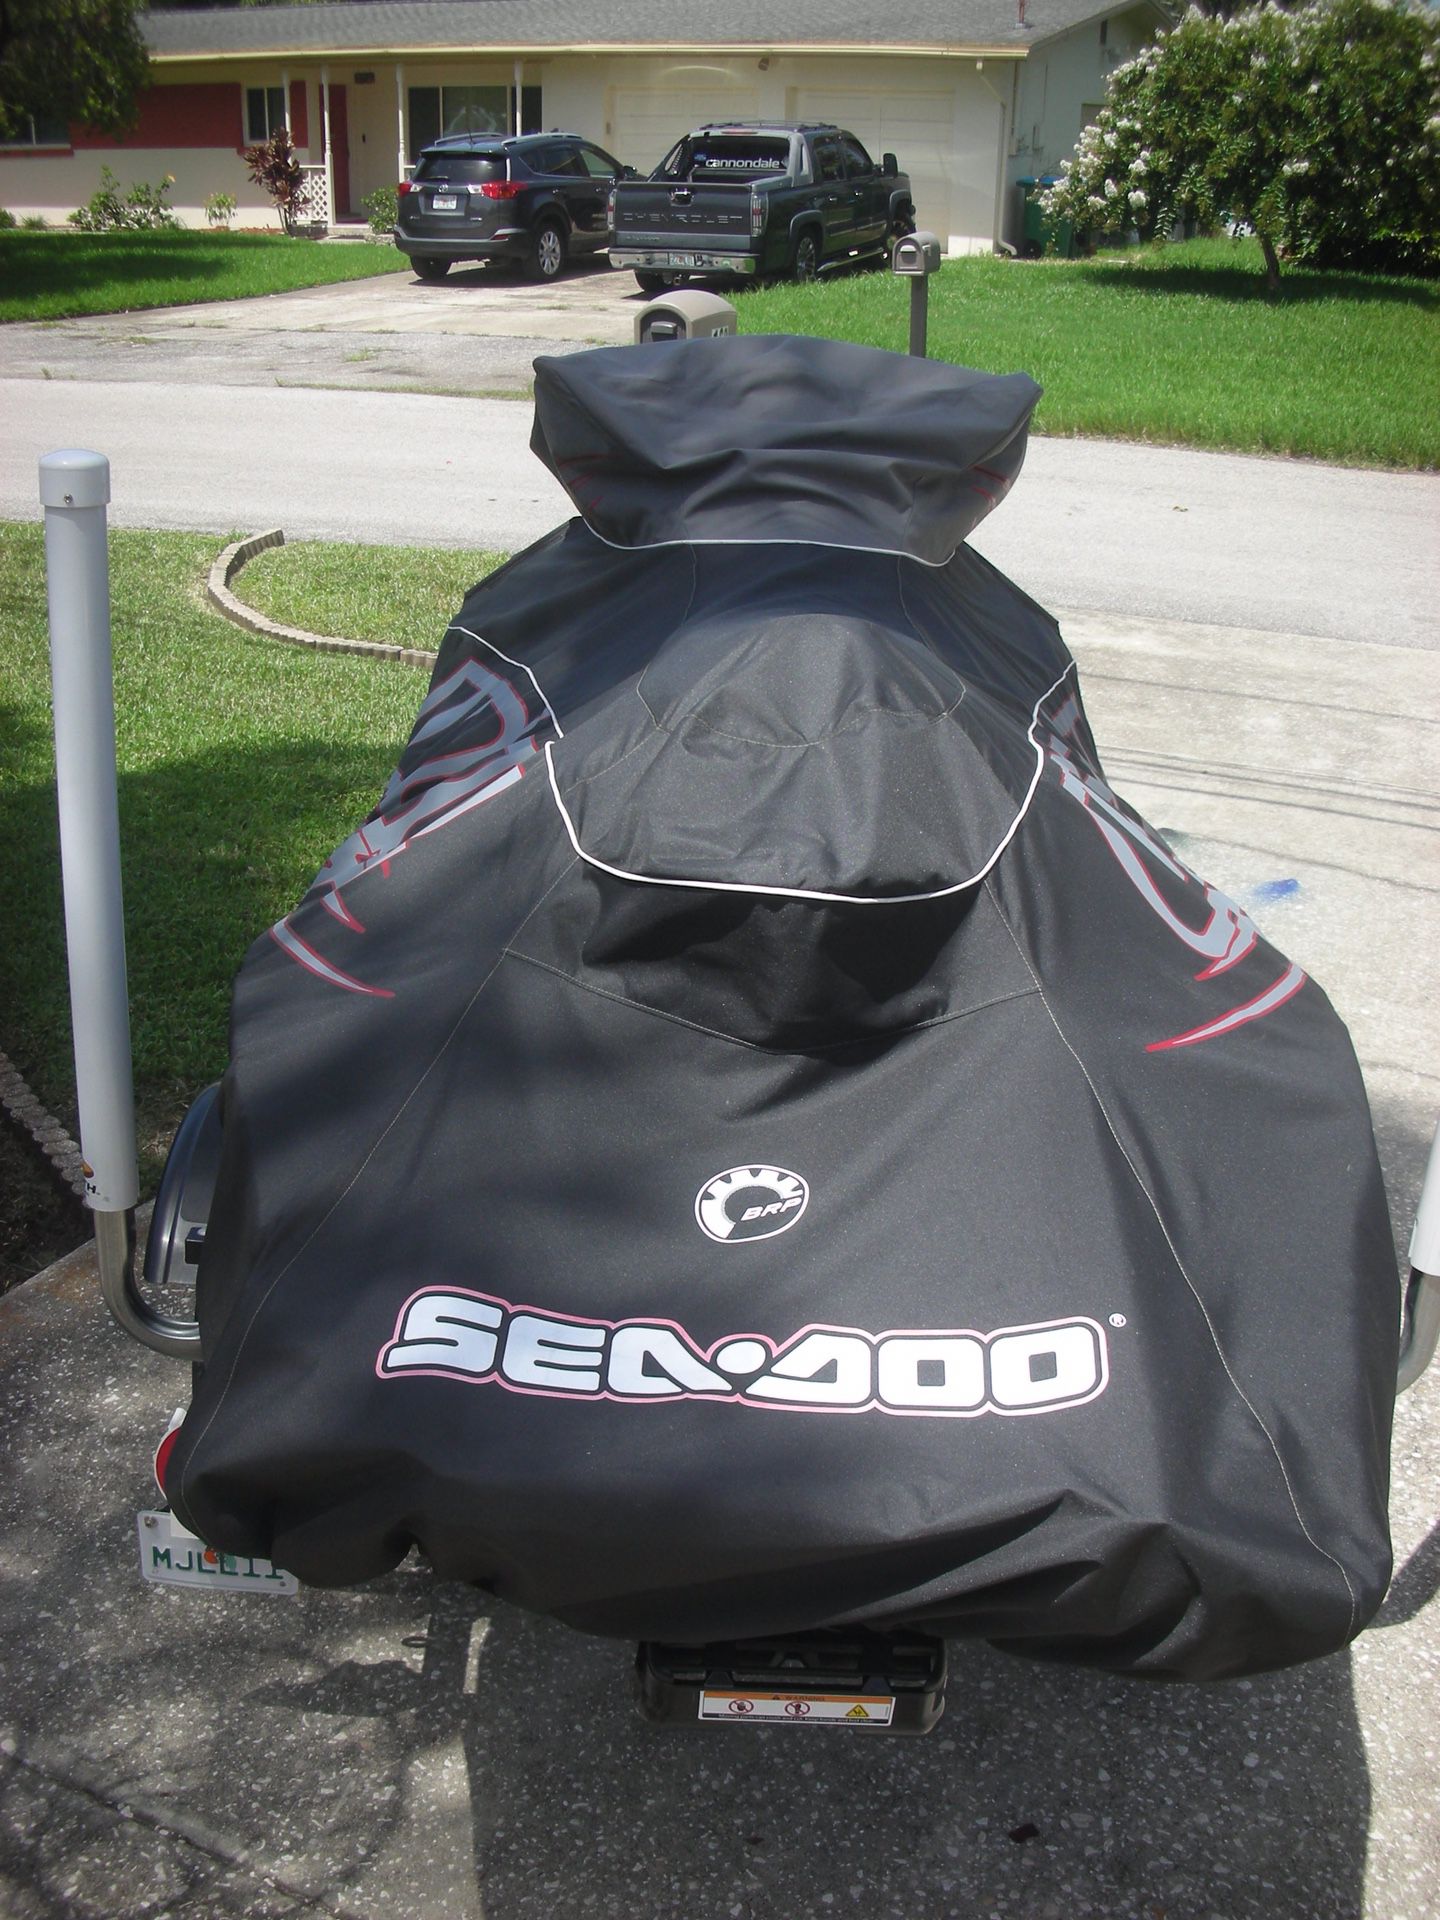 2008 Sea Doo Wake 215 Cover ONLY - $175 OBO